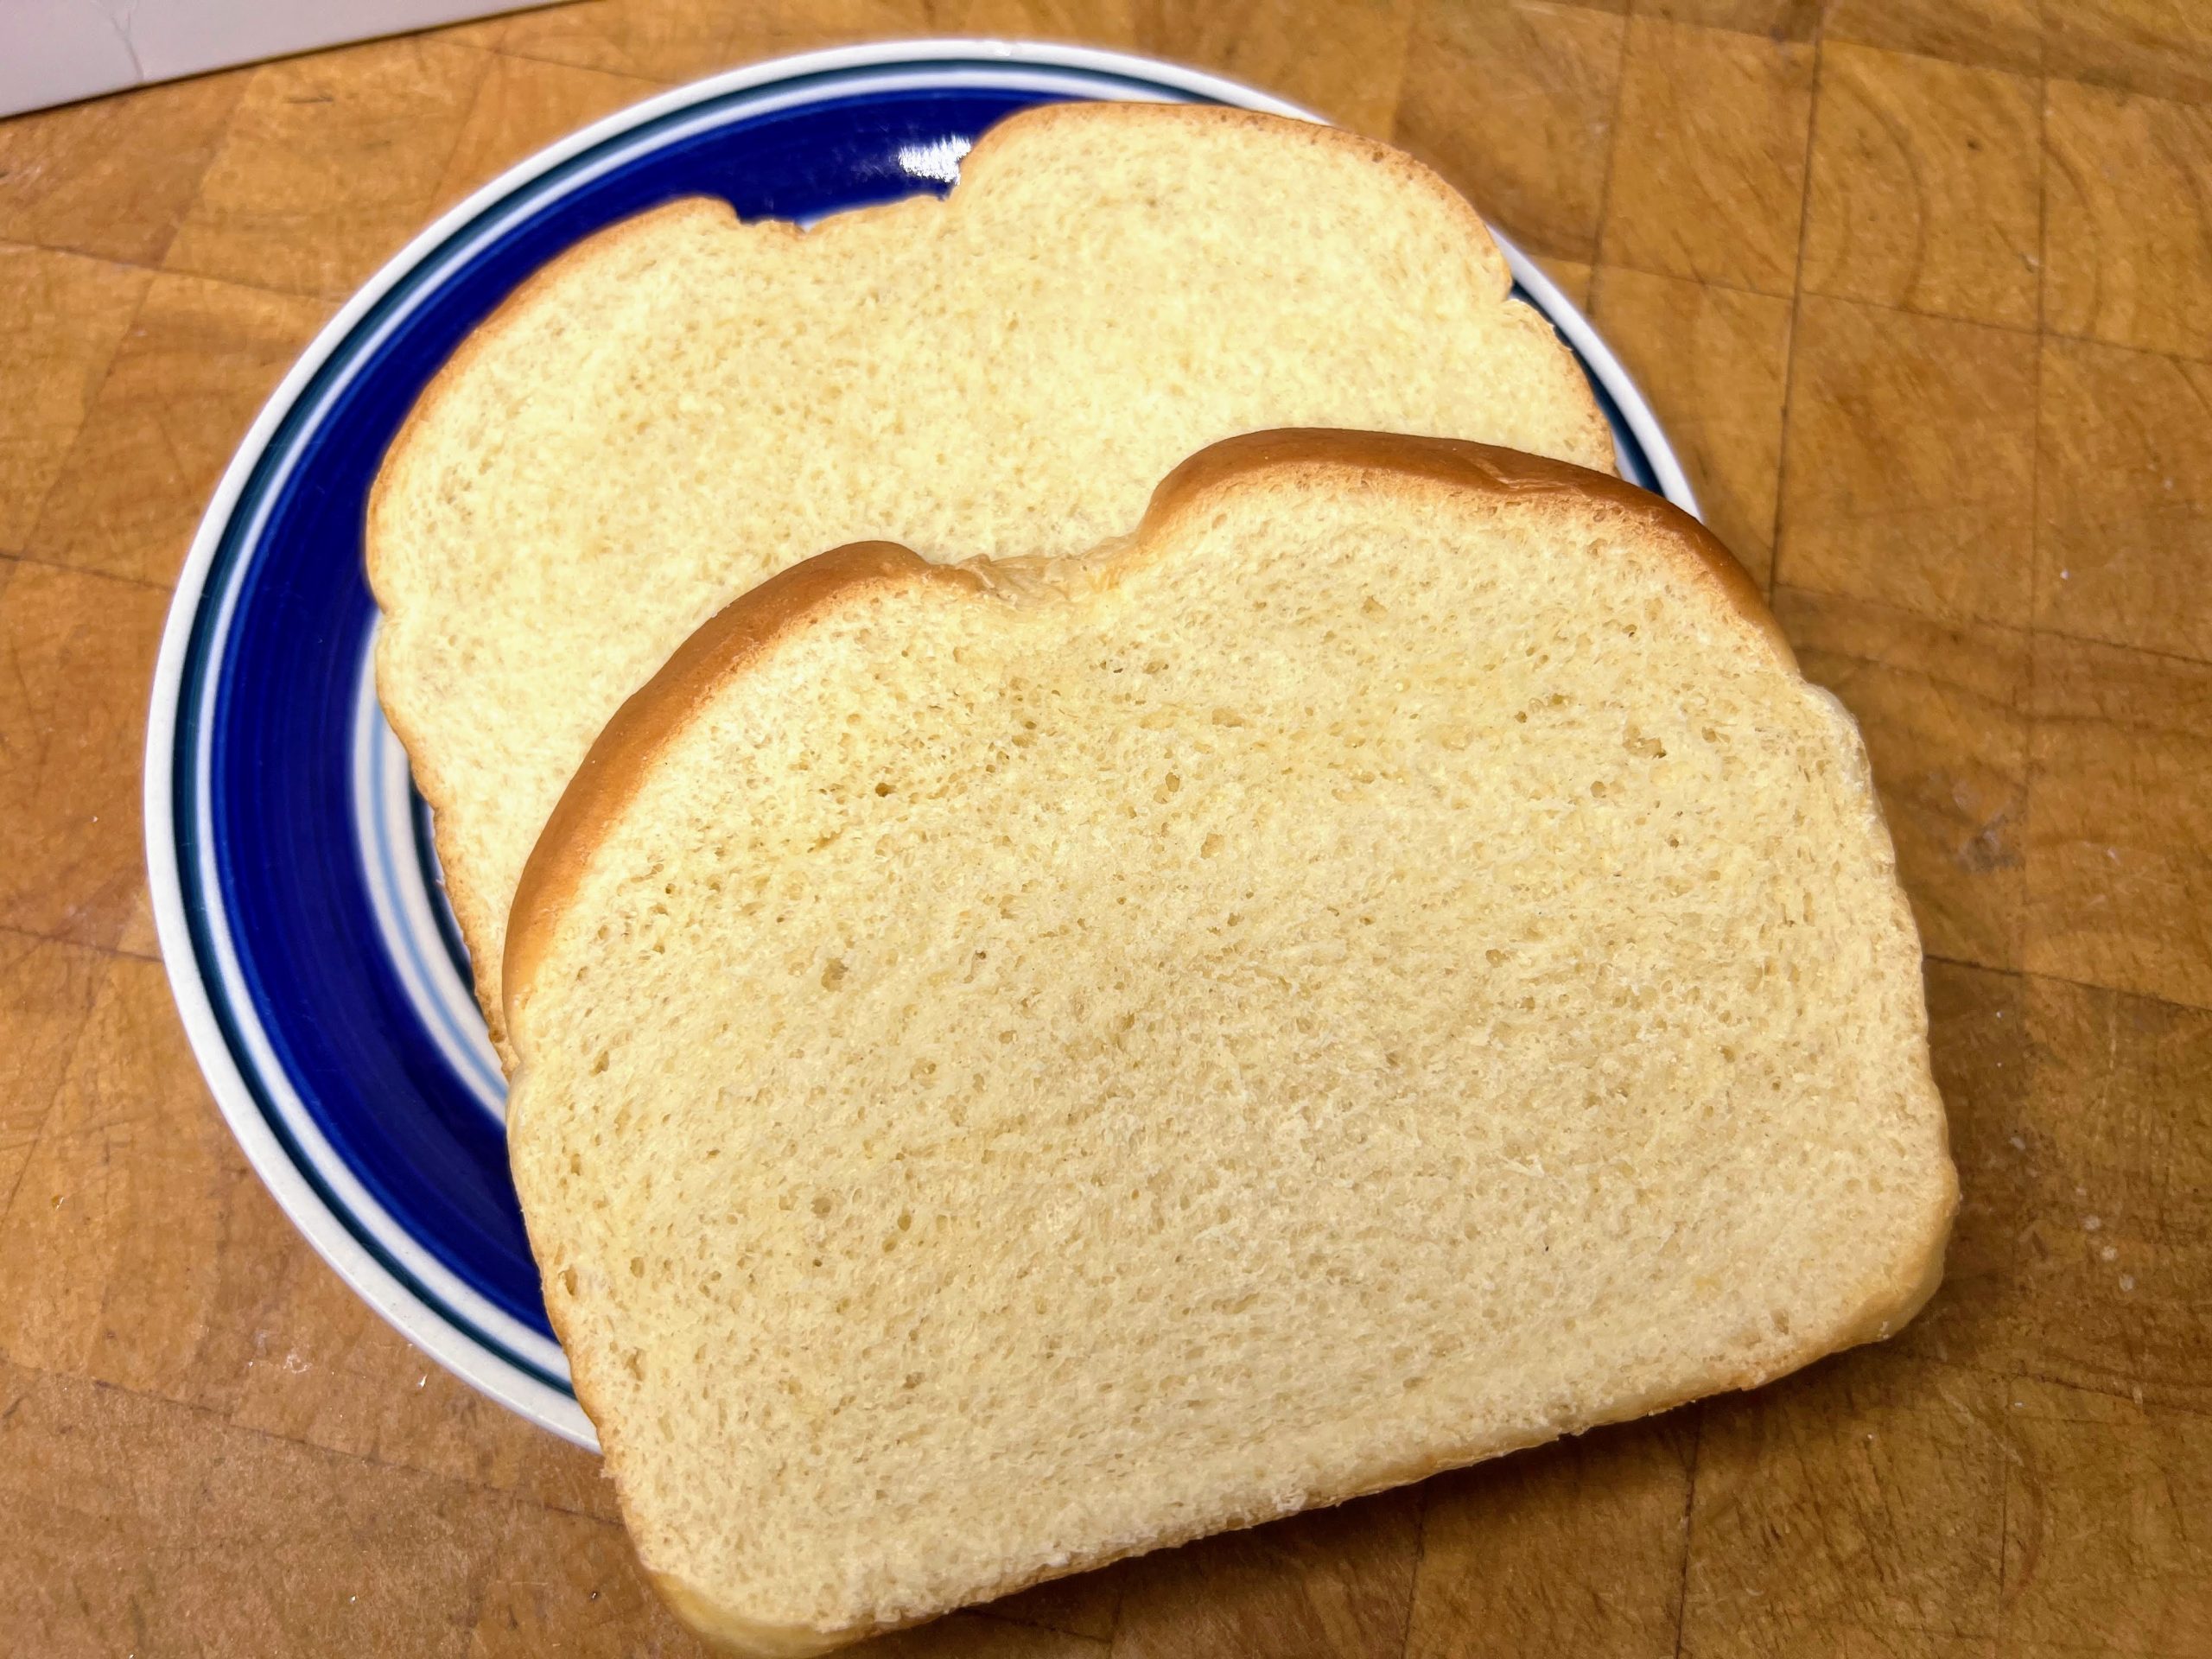 two slices of sourdough bread on a plate